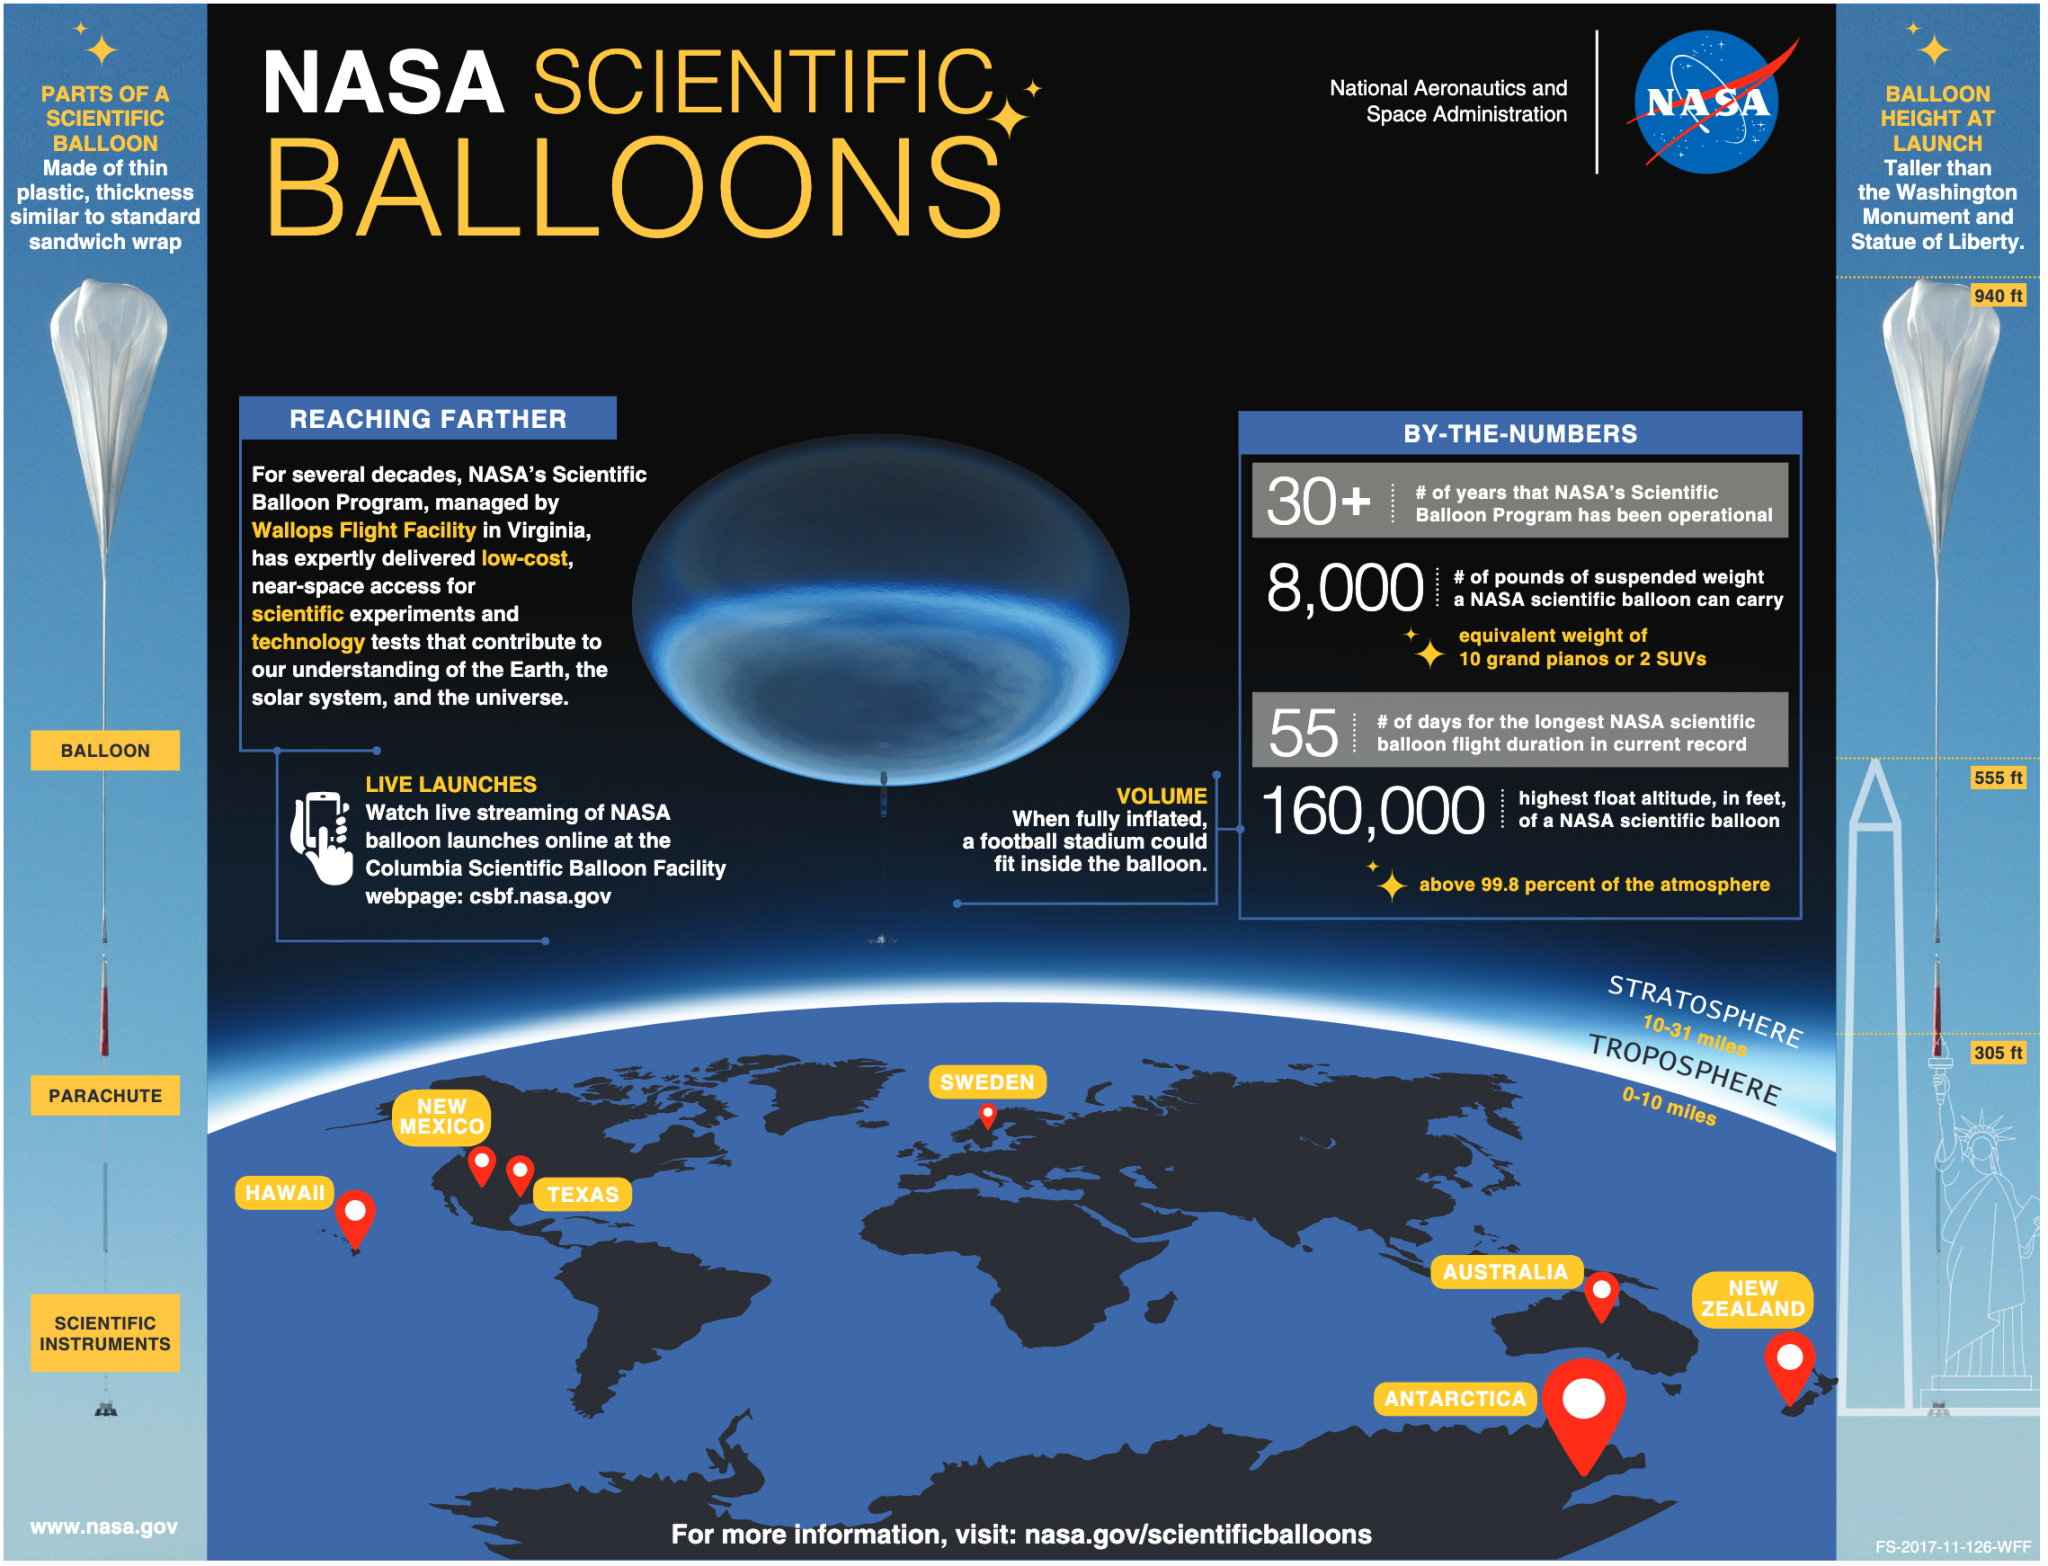 An infographic on NASA Scientific Balloons. "For several decades, NASA's Scientific Balloon Program, managed by Wallops Flight Facility in Virginia, has expertiv delivered low-cost near space access for scientific experiments and technology tests that contribute to our Understanding of the Earth. the solar system, and the universe."